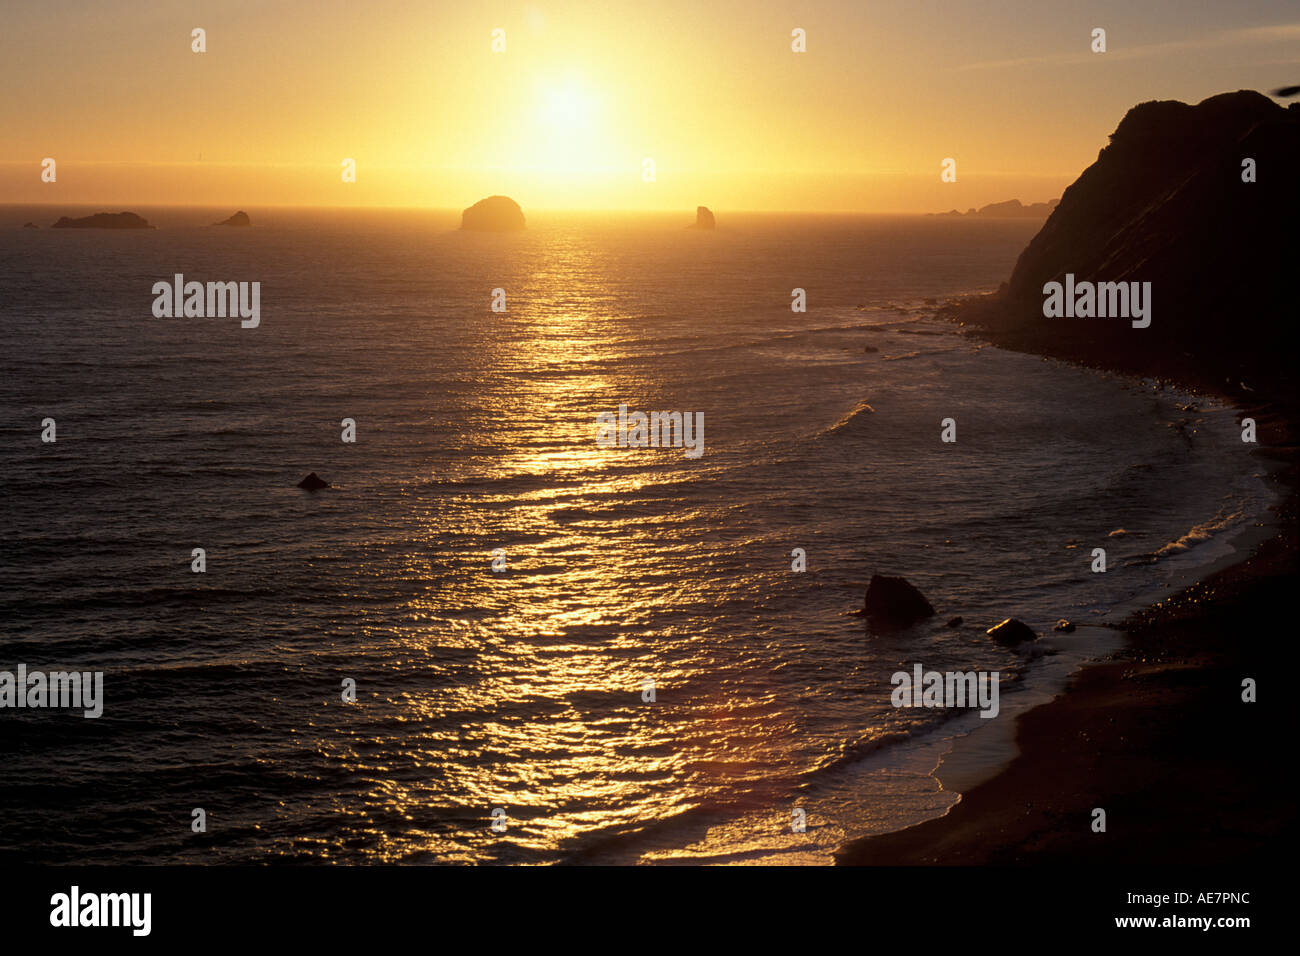 Port Orford OR Oregon Coast Sunset Pacific Ocean June Stock Photo